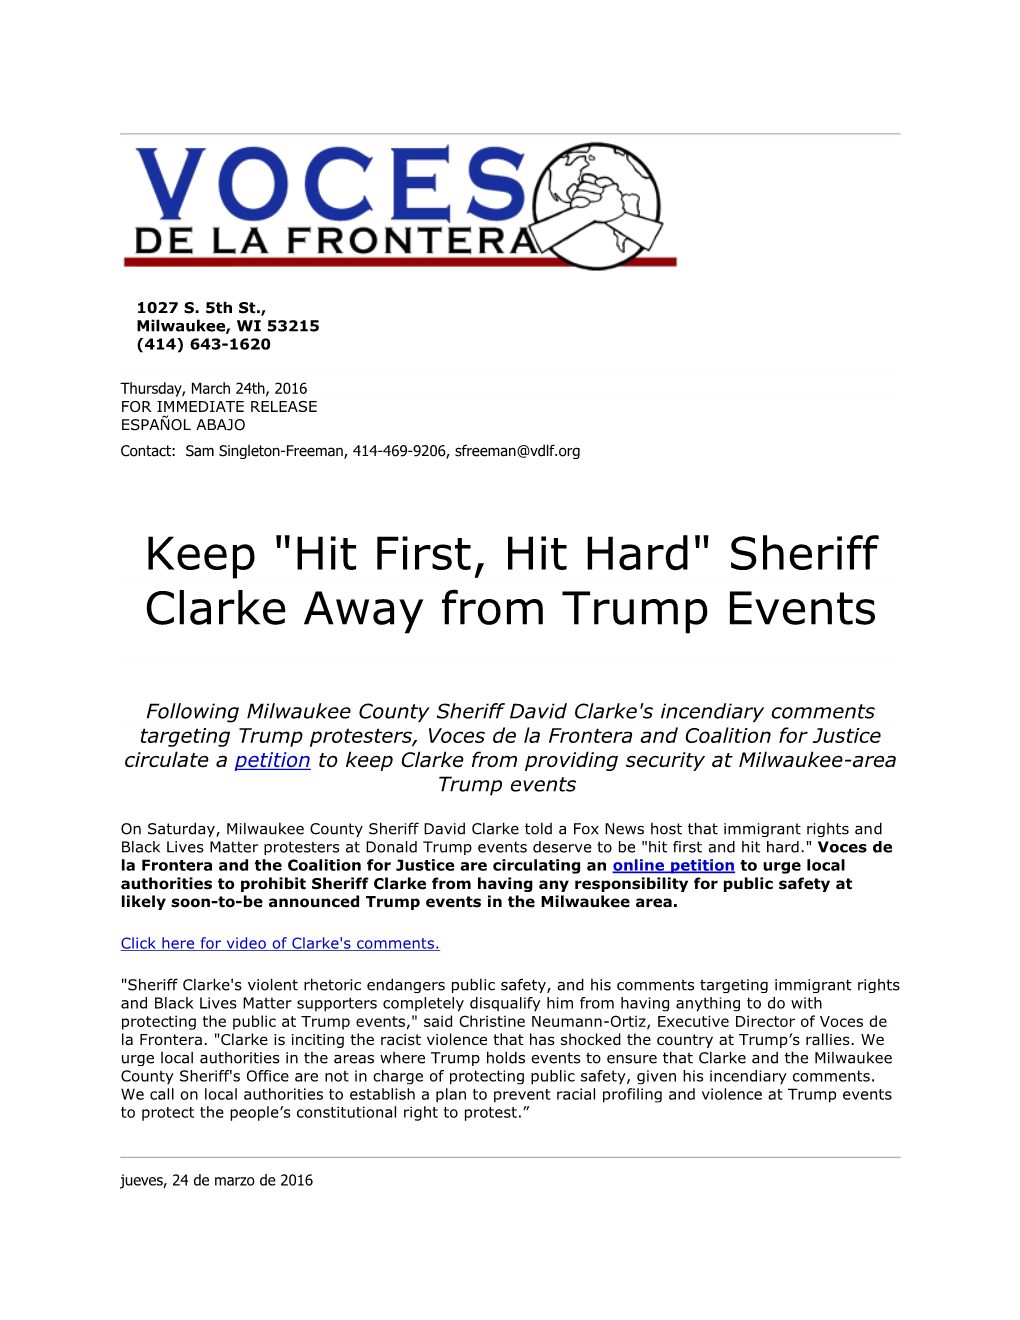 Sheriff Clarke Away from Trump Events